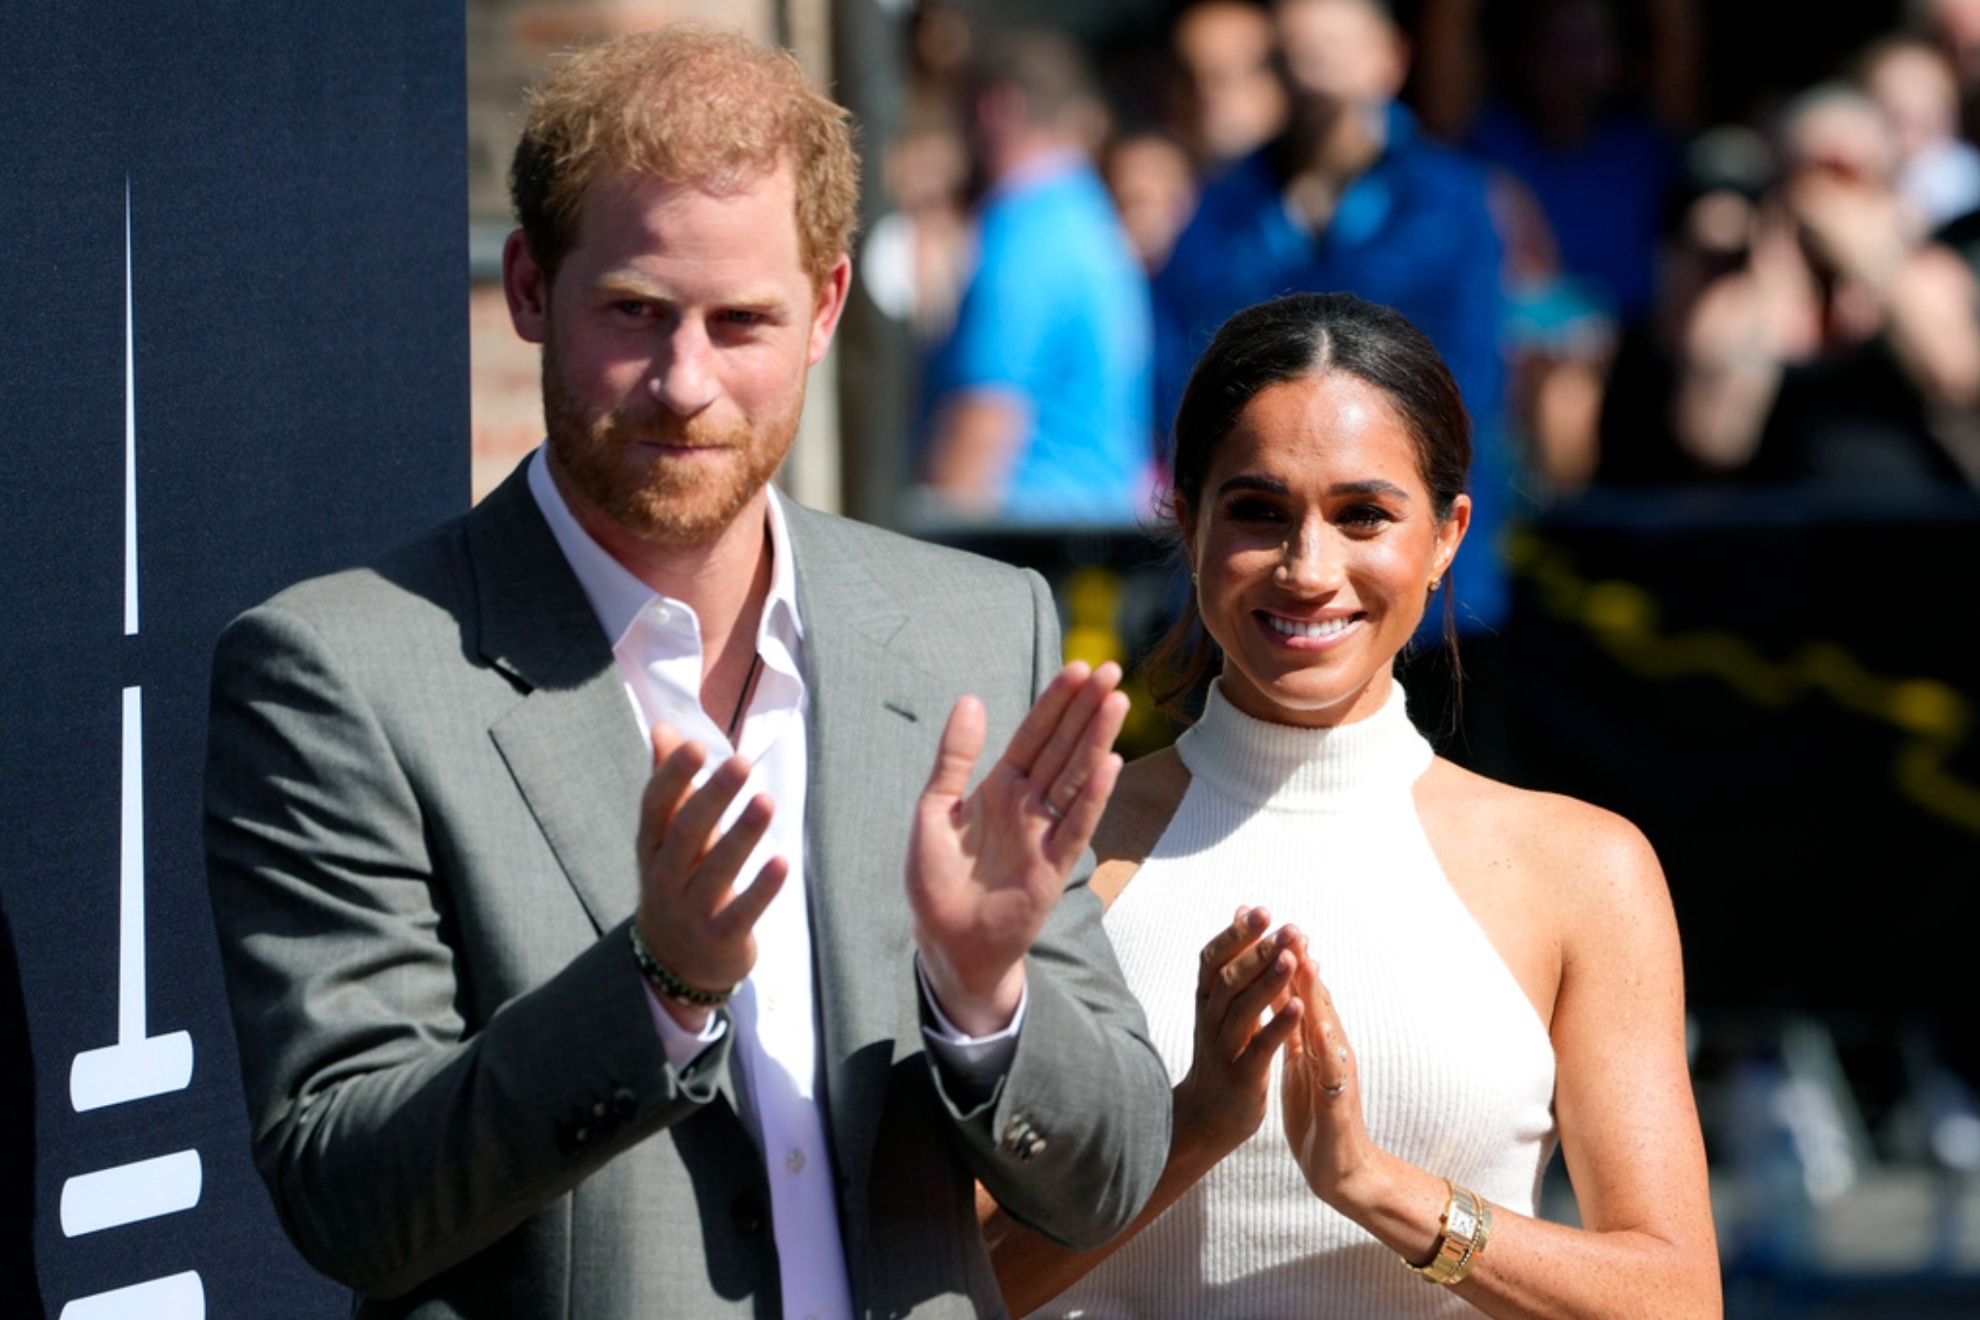 Meghan Markle and Prince Harry are returning to Netflix with a new show